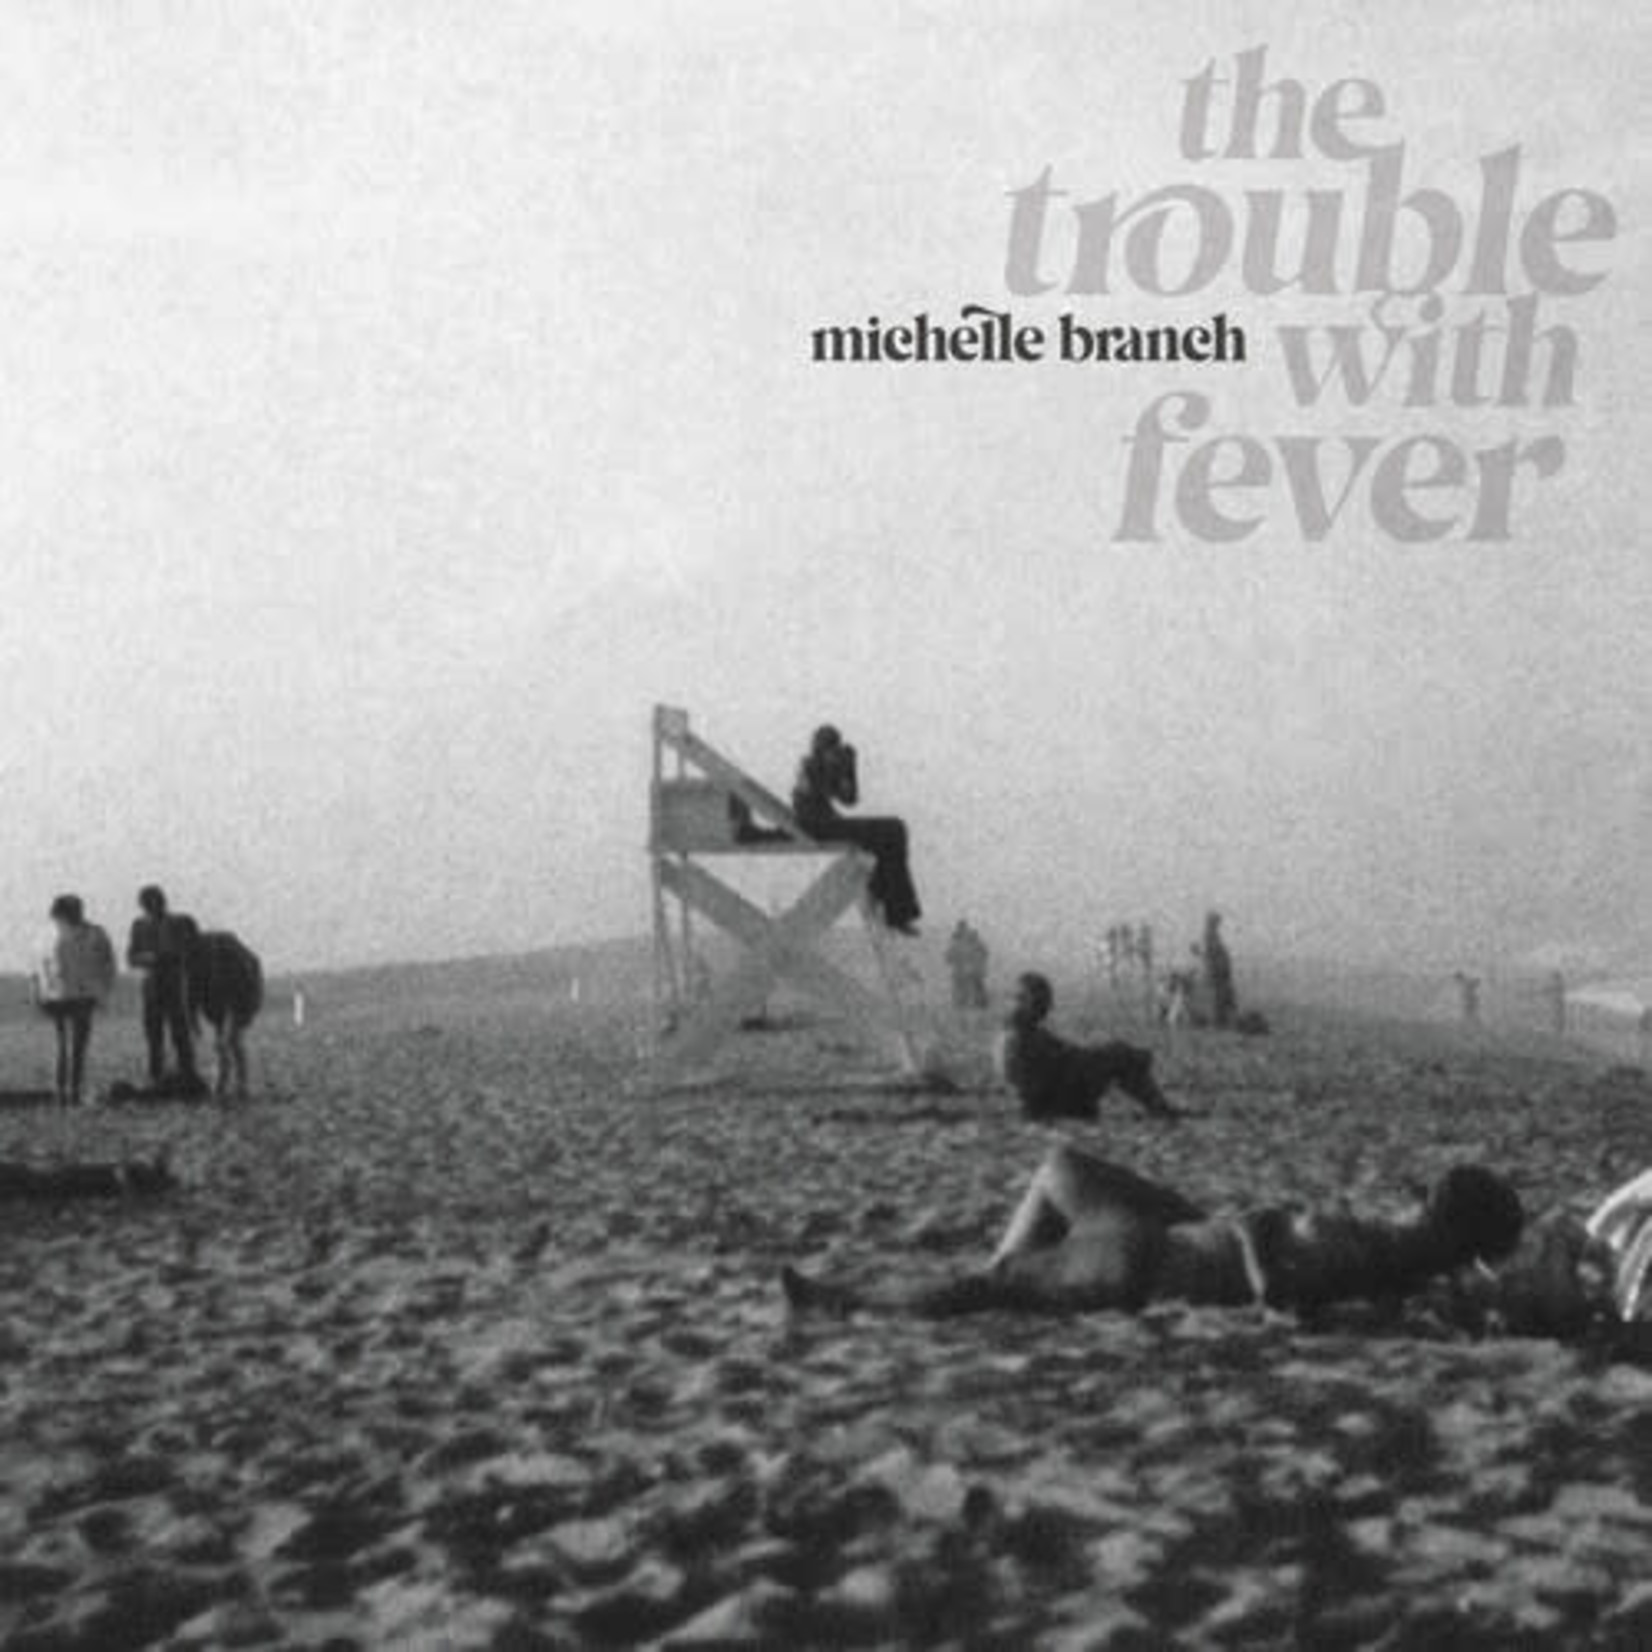 Nonesuch Michelle Branch - The Trouble With Fever (LP)